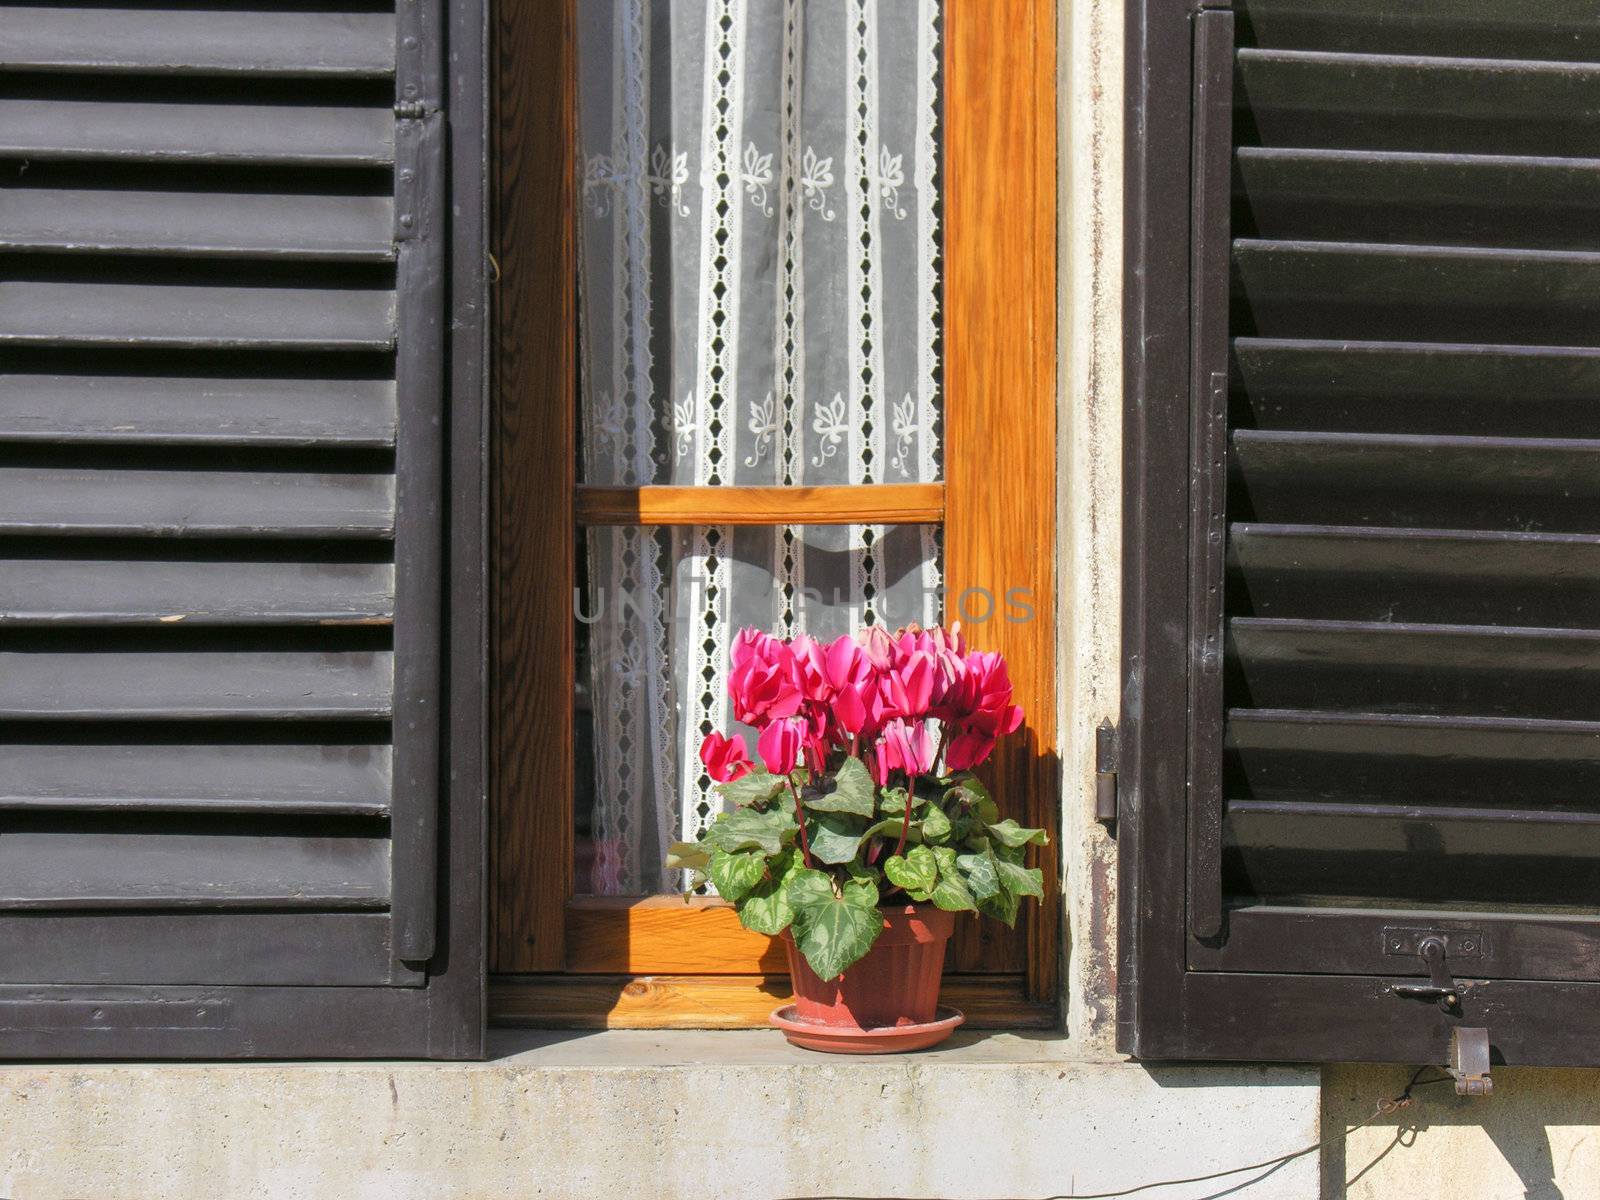 Flowers at the Window, Siena, Tuscany, Italy by jovannig